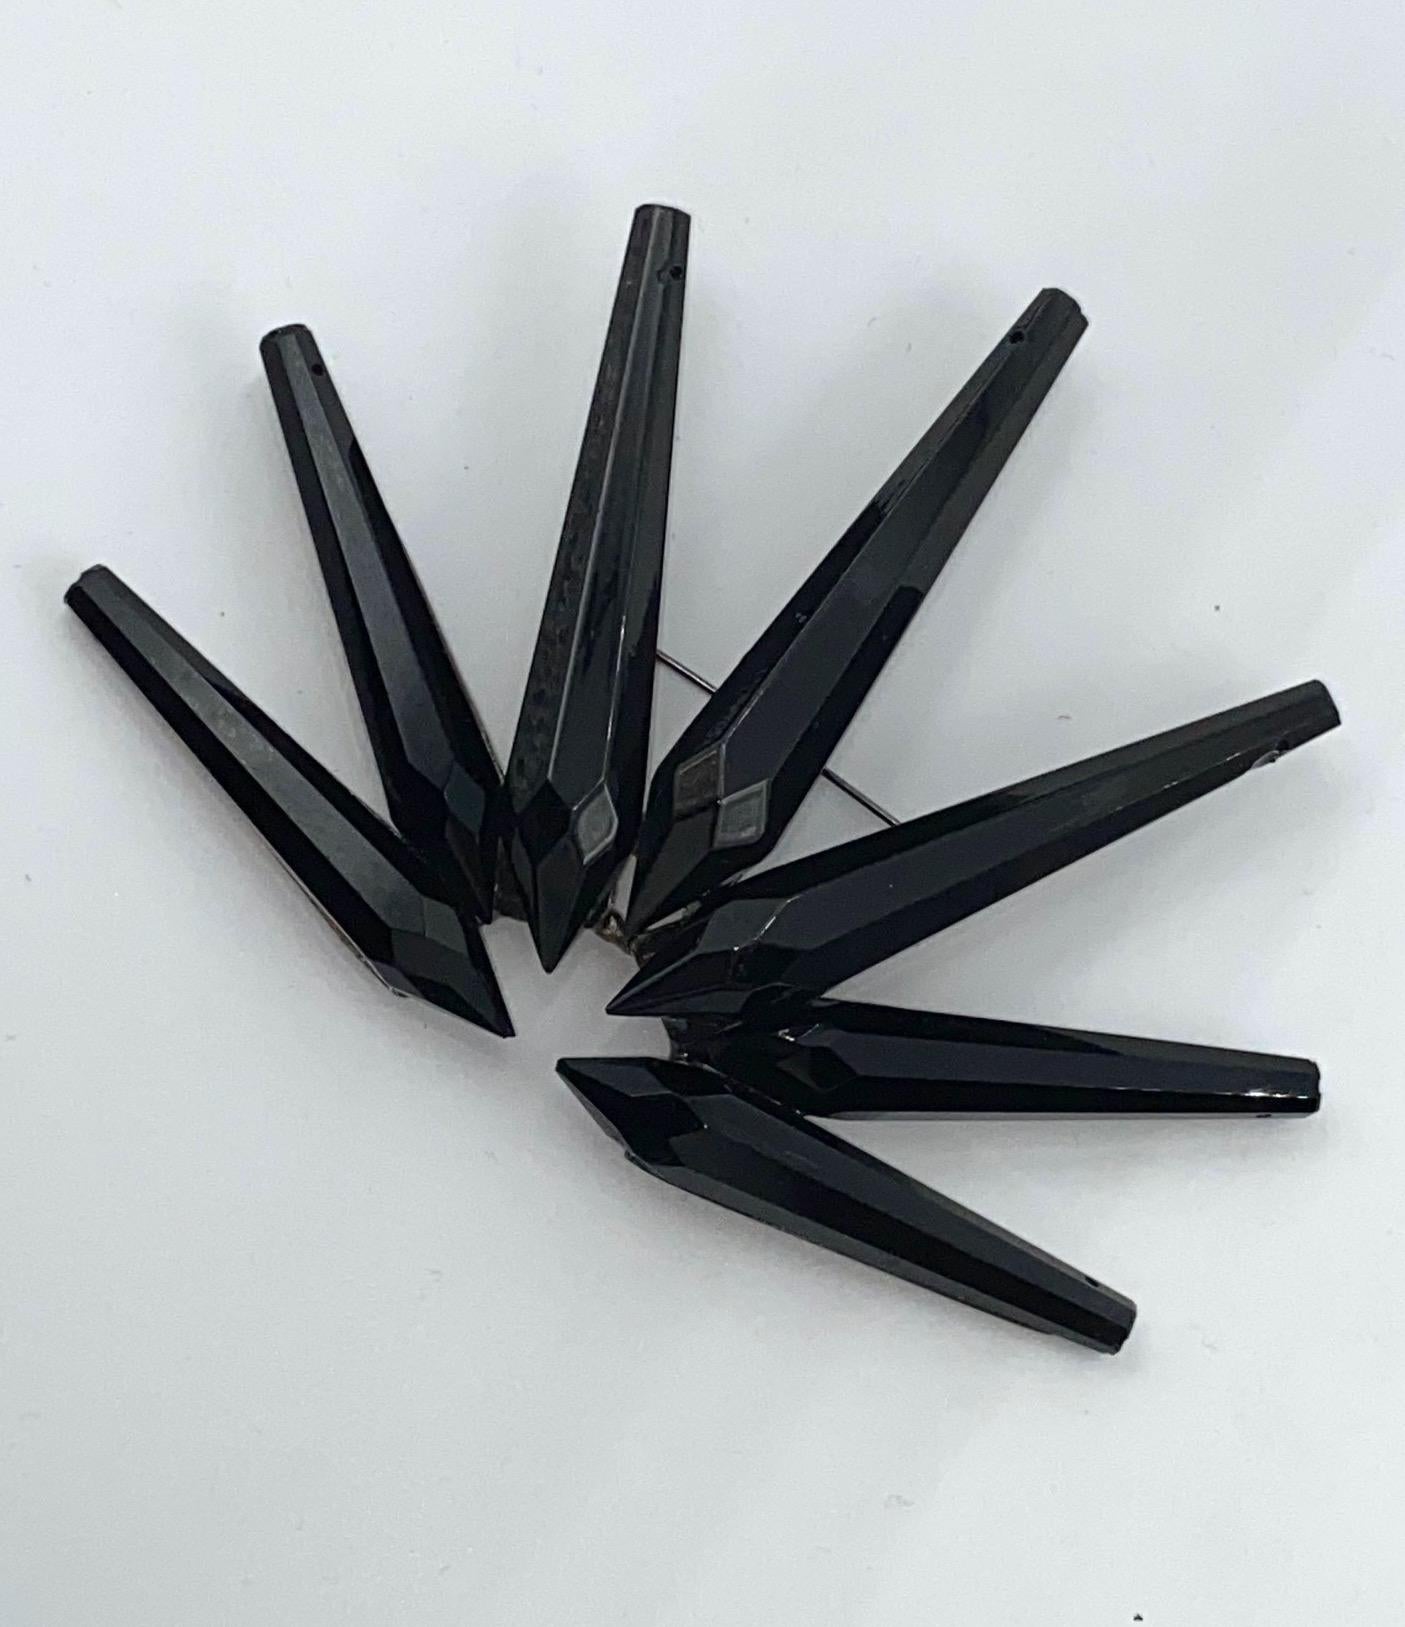 Presented is a large chandelier prism brooch by Giorgio Armani from the 1990s. Seven faceted black glass spikes with drilled tops intended for use on chandeliers are mounted onto a gunmetal grey finish metal setting in a fan formation. The bottom